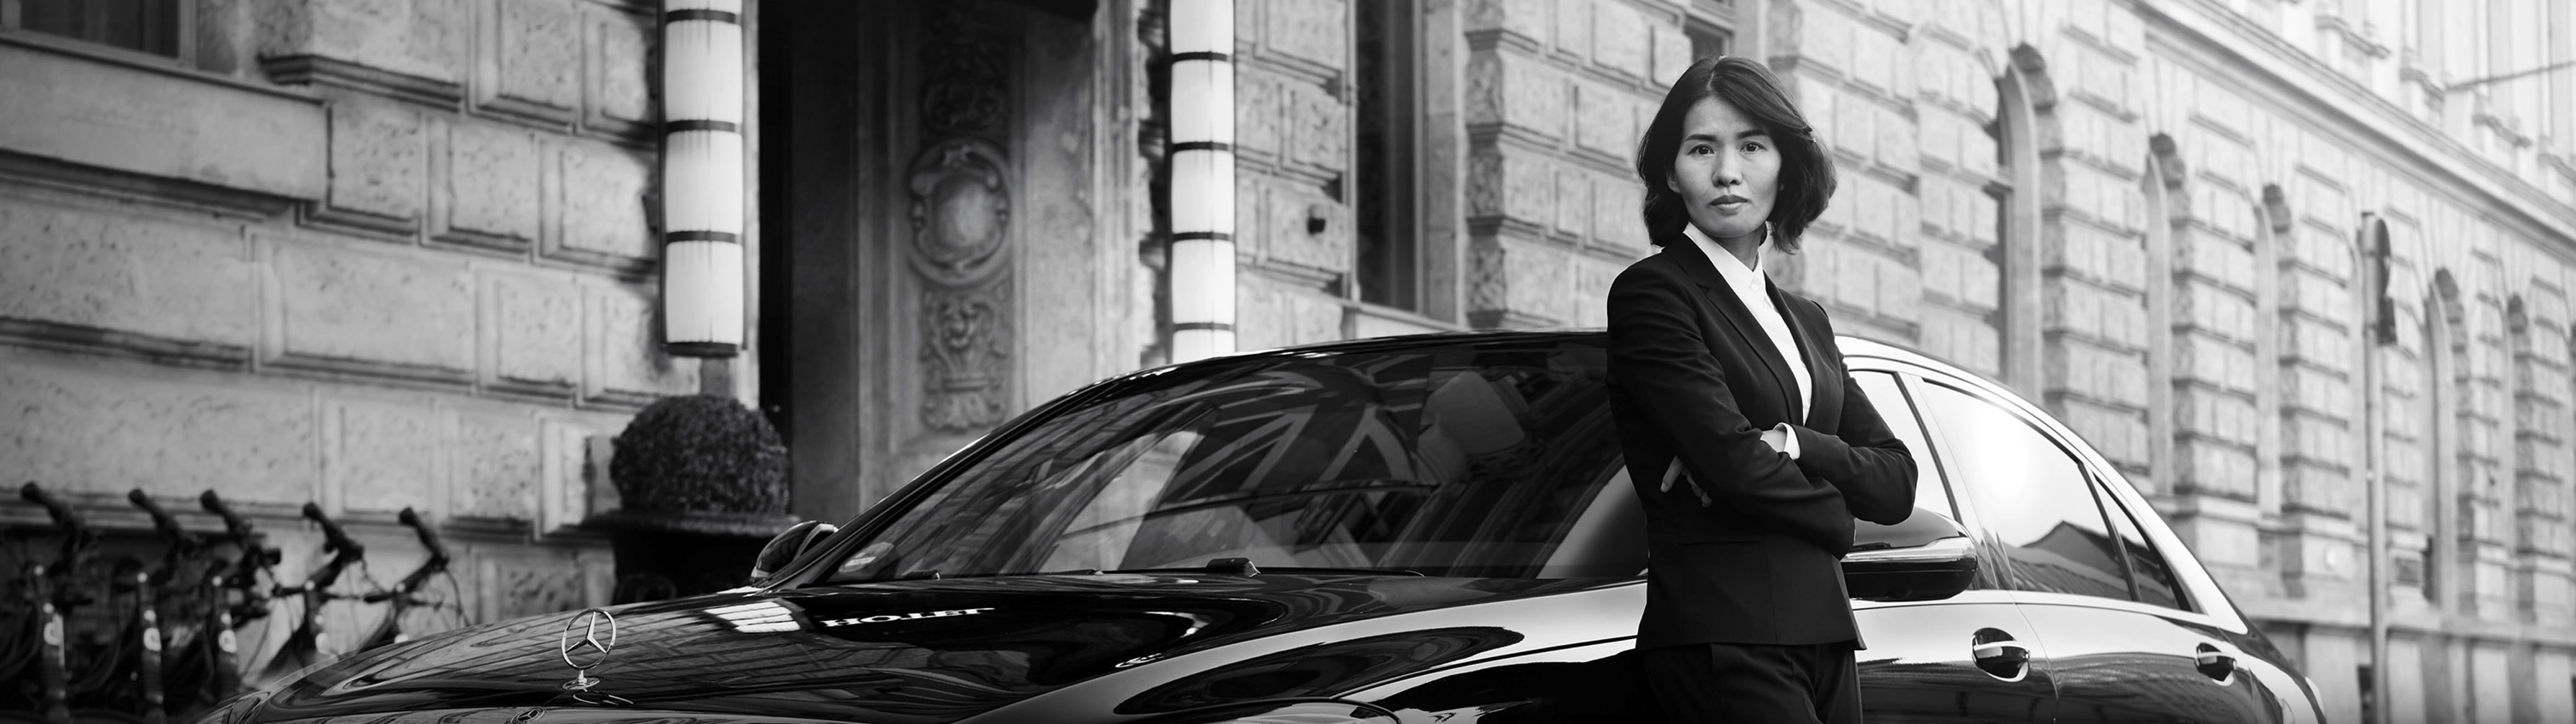 Real Blacklane chauffeur Yen stands in front of her vehicle wearing a suit.